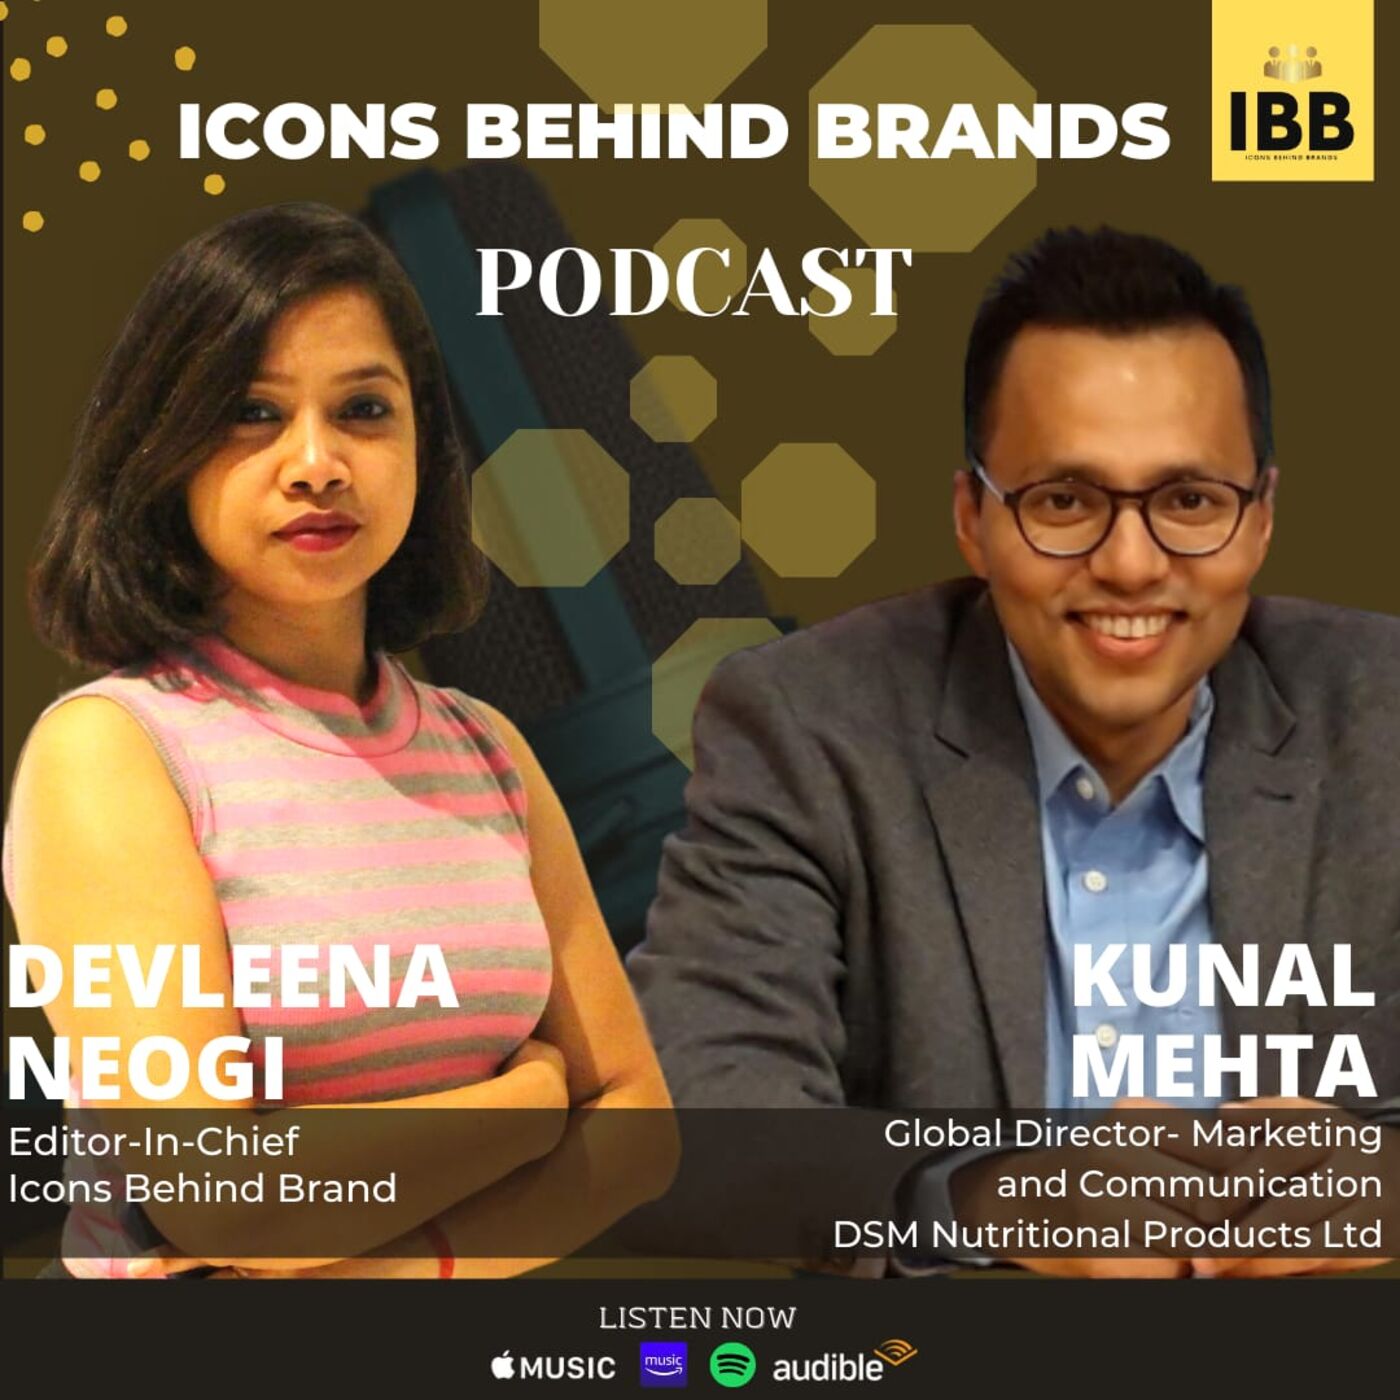 Upcoming insightful conversation on the core values of marketing | Kunal Mehta | Icons Behind Brands